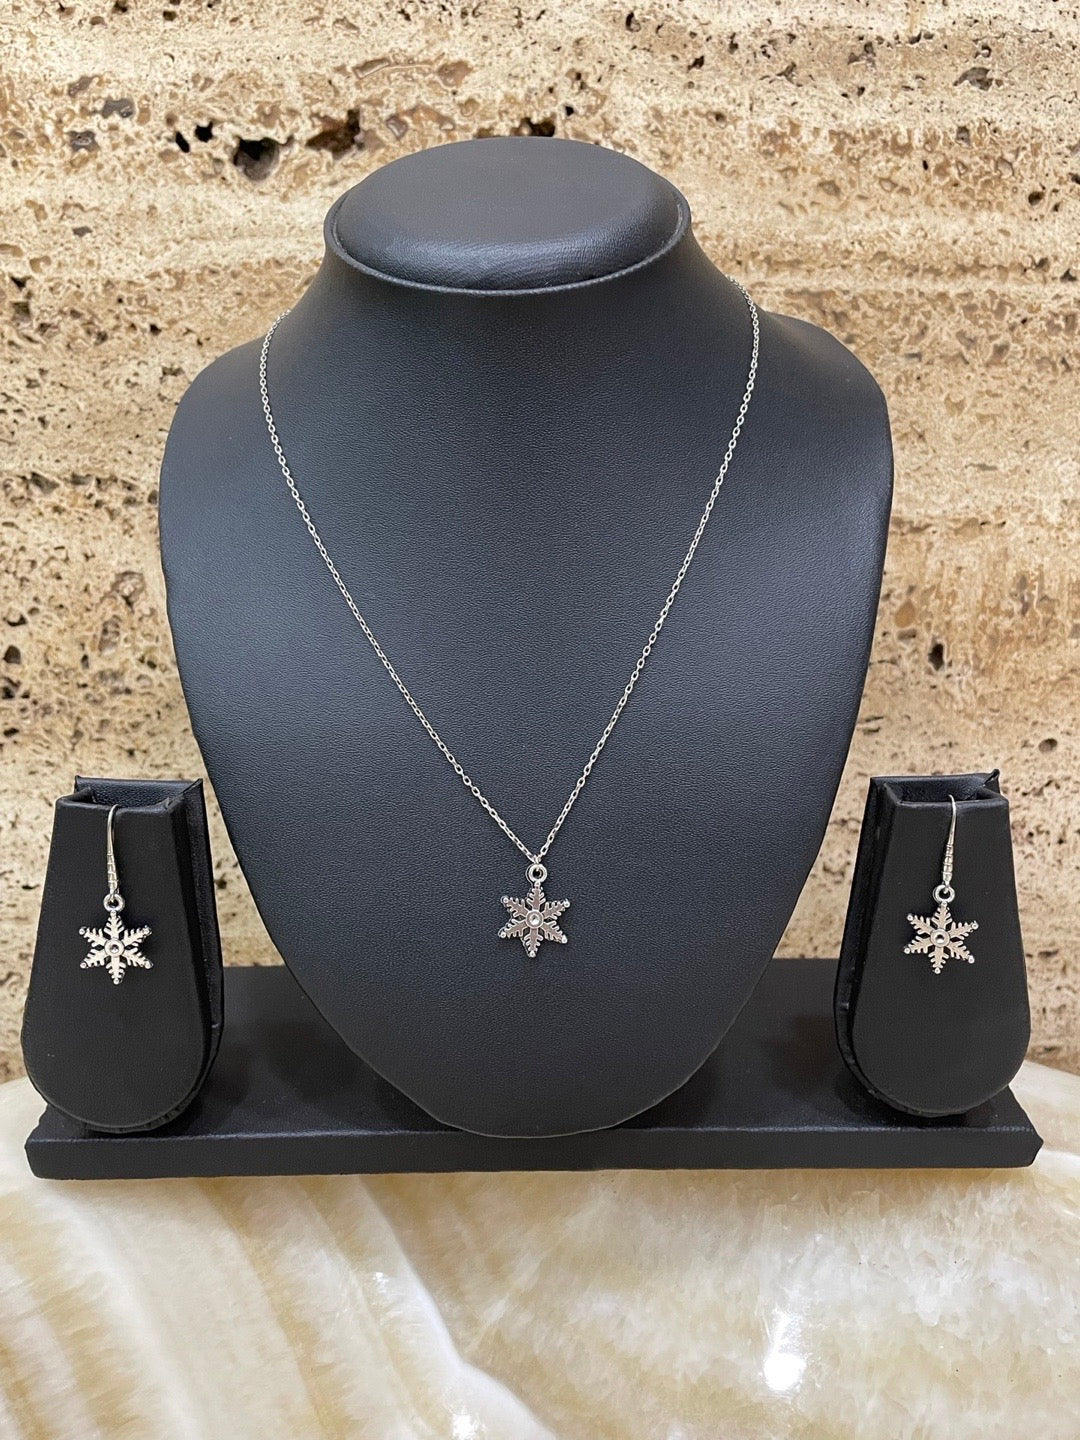 Snowflake Earring And Pendant Set Sale In 14K White Gold | Fascinating  Diamonds